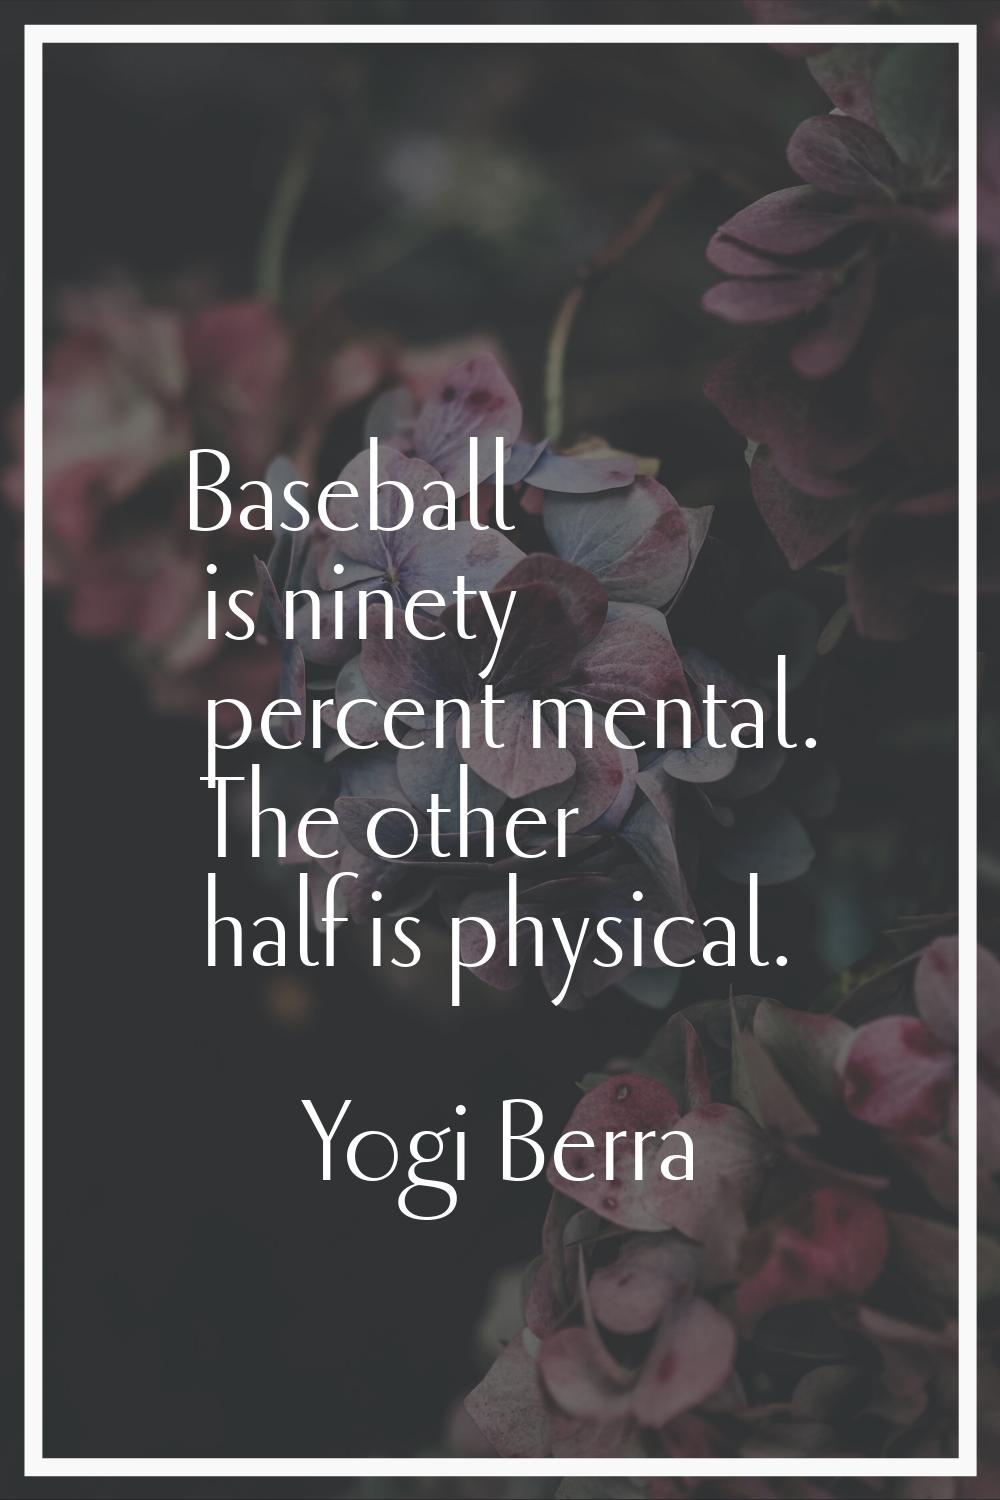 Baseball is ninety percent mental. The other half is physical.